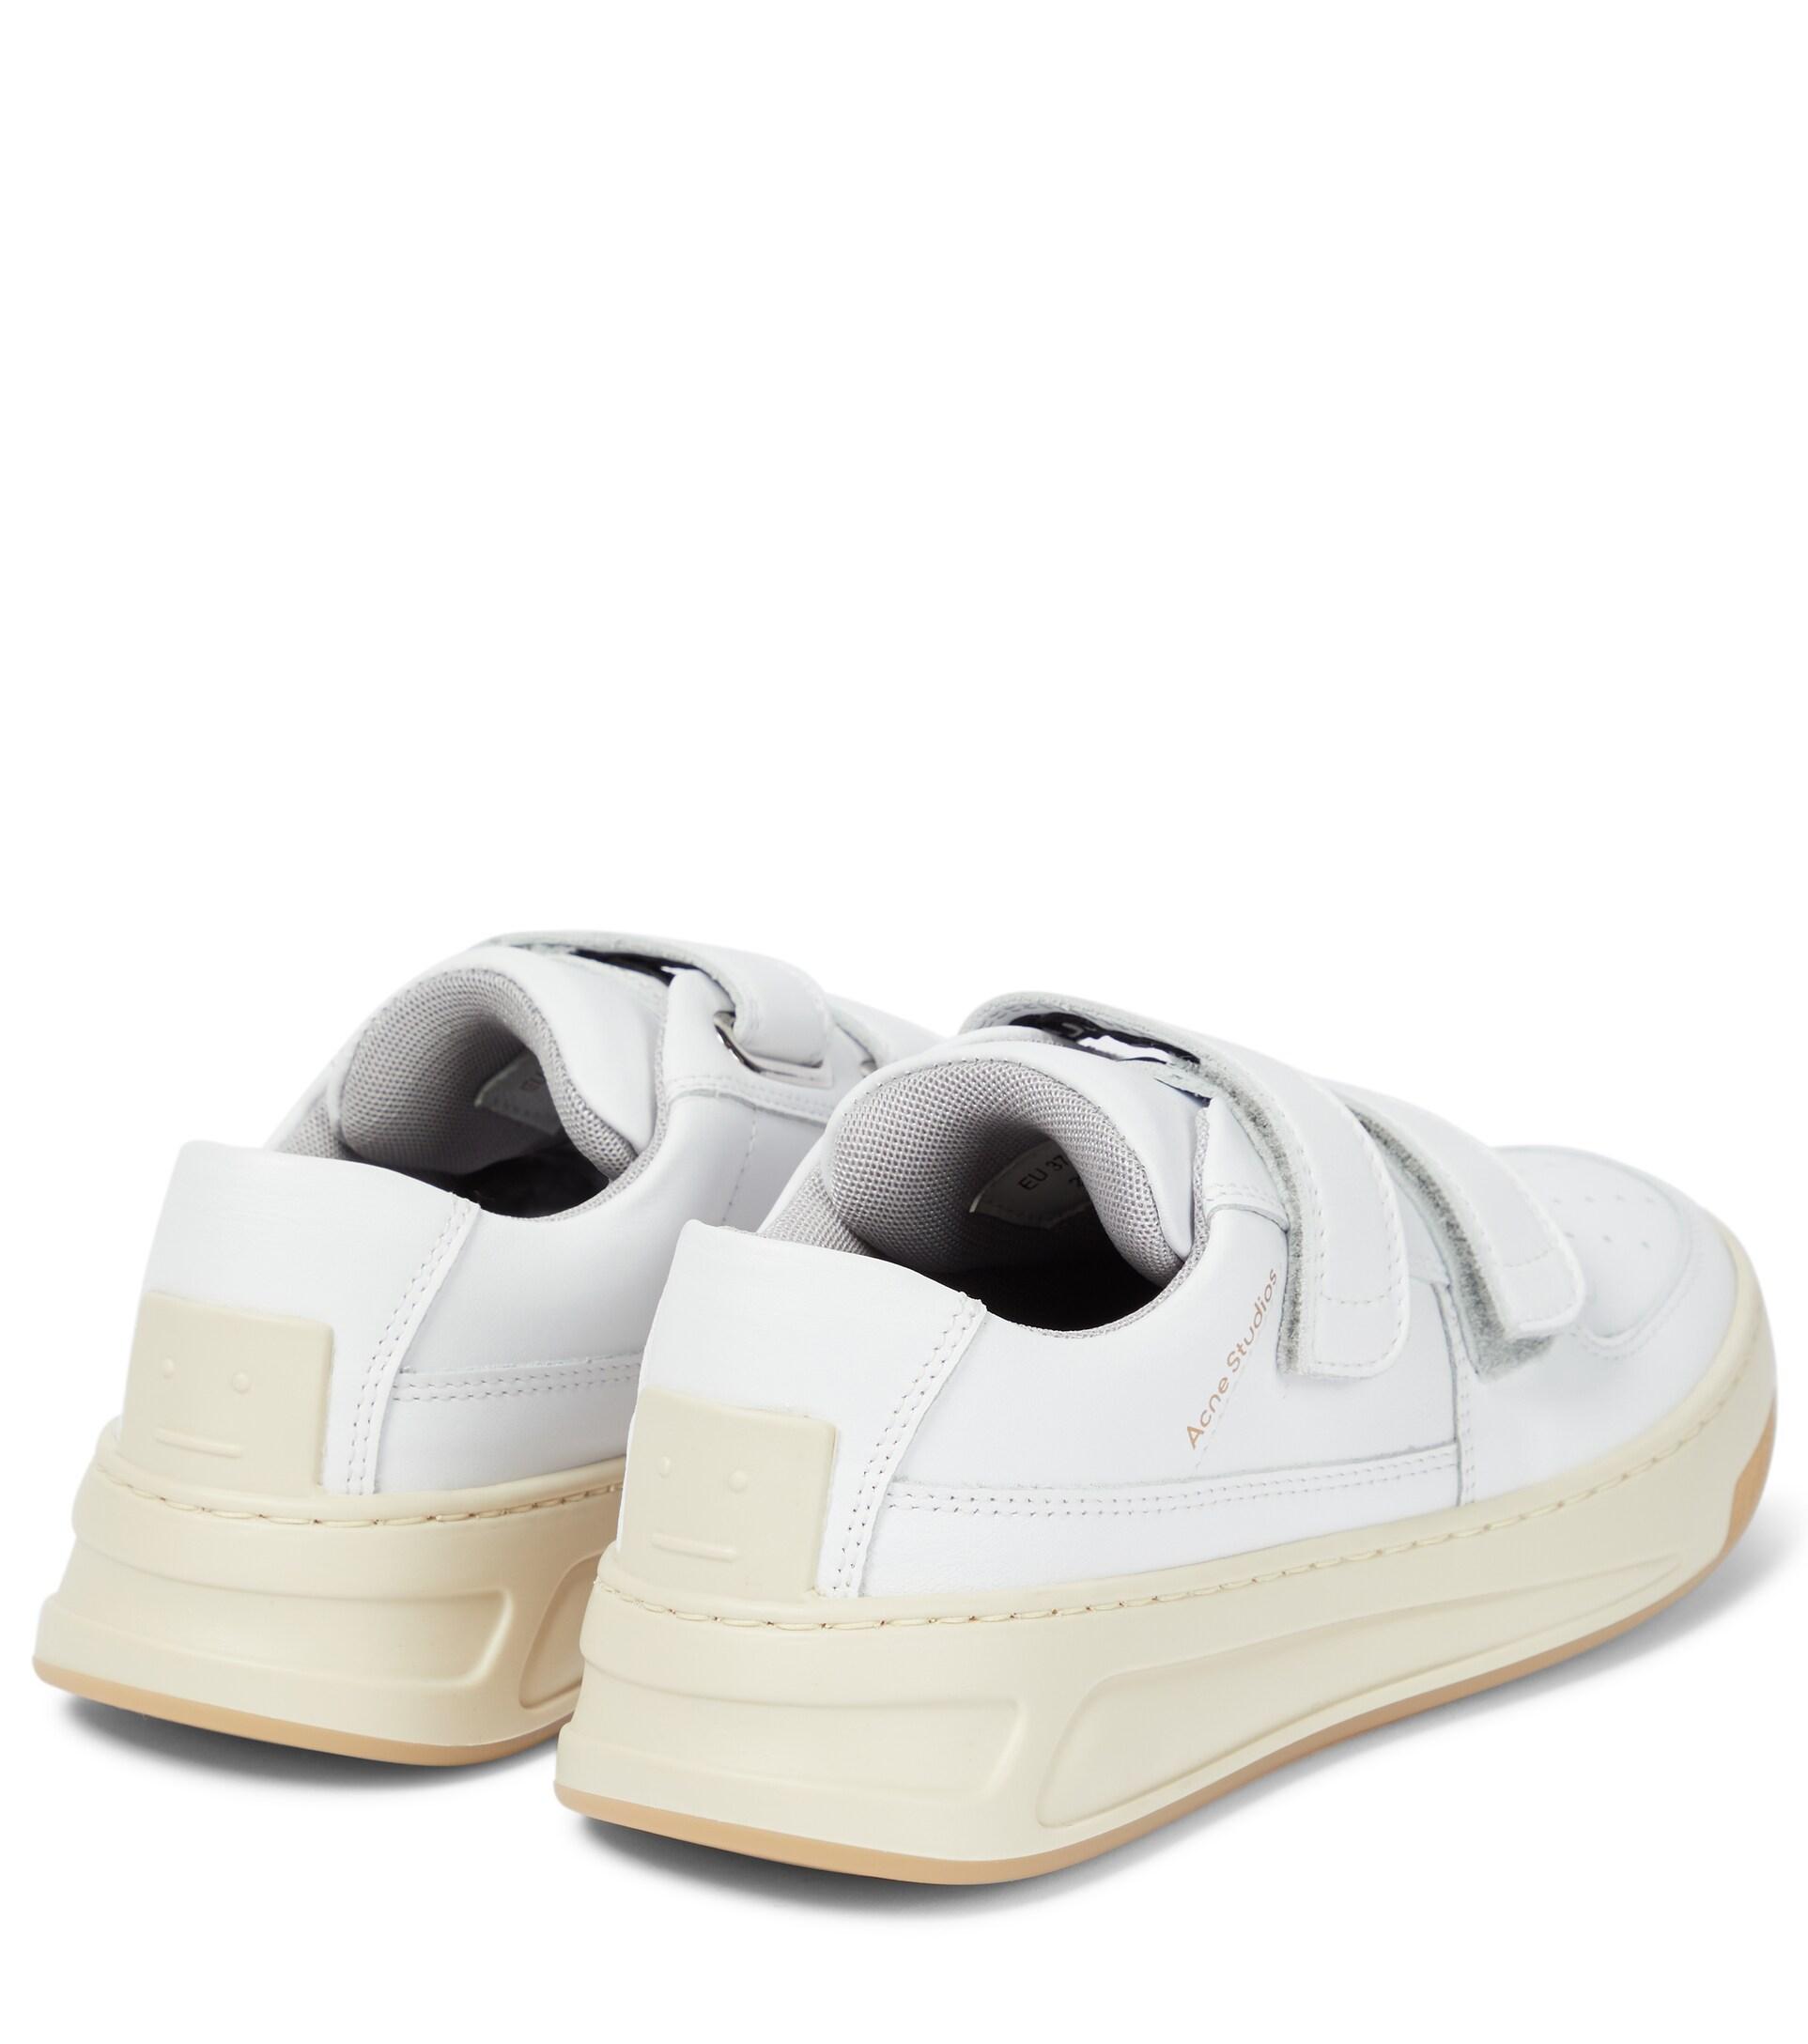 Acne Studios Steffey Leather Sneakers in White - Save 42% | Lyst